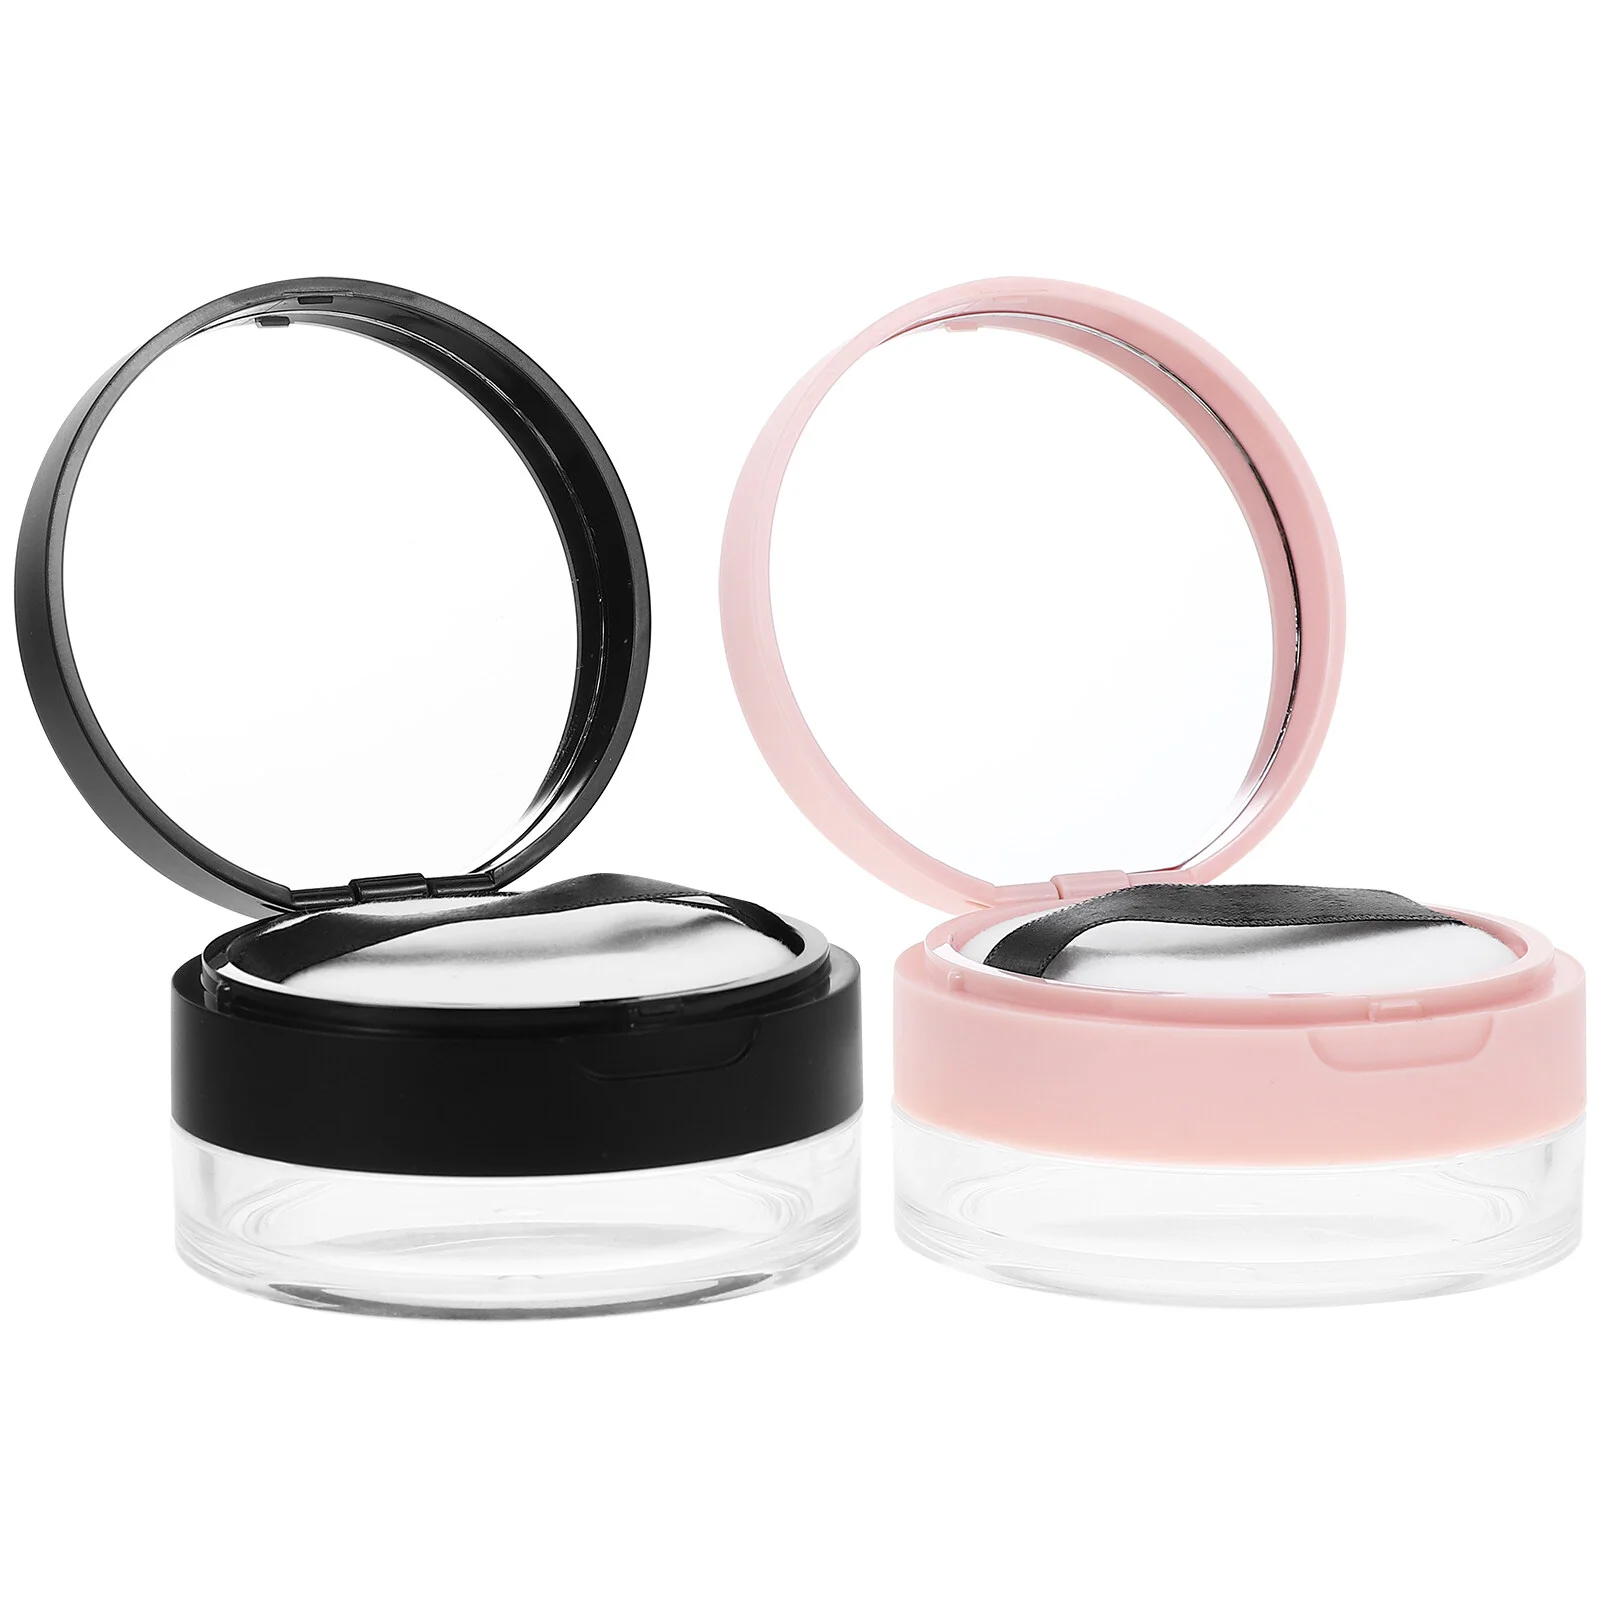 2 Pcs Makeup Travel Containers Puff Powder Applicator Body Loose 6.8x6.8cm Baby Small Plastic Empty images - 6